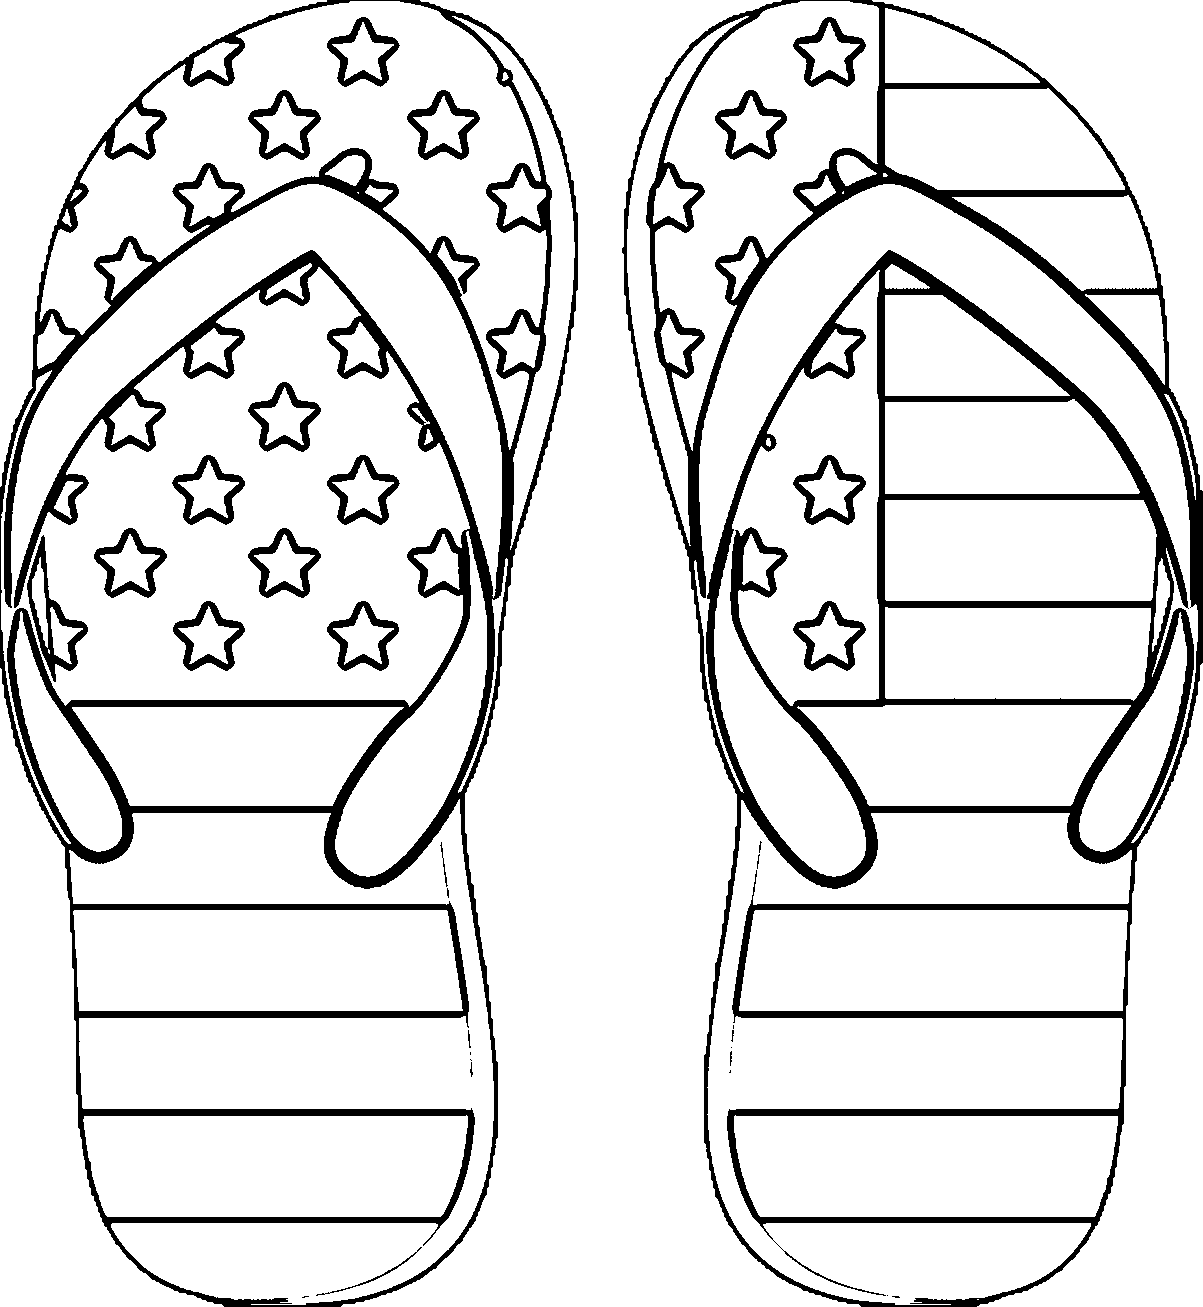 printable 4th of july coloring pages Coloring4free